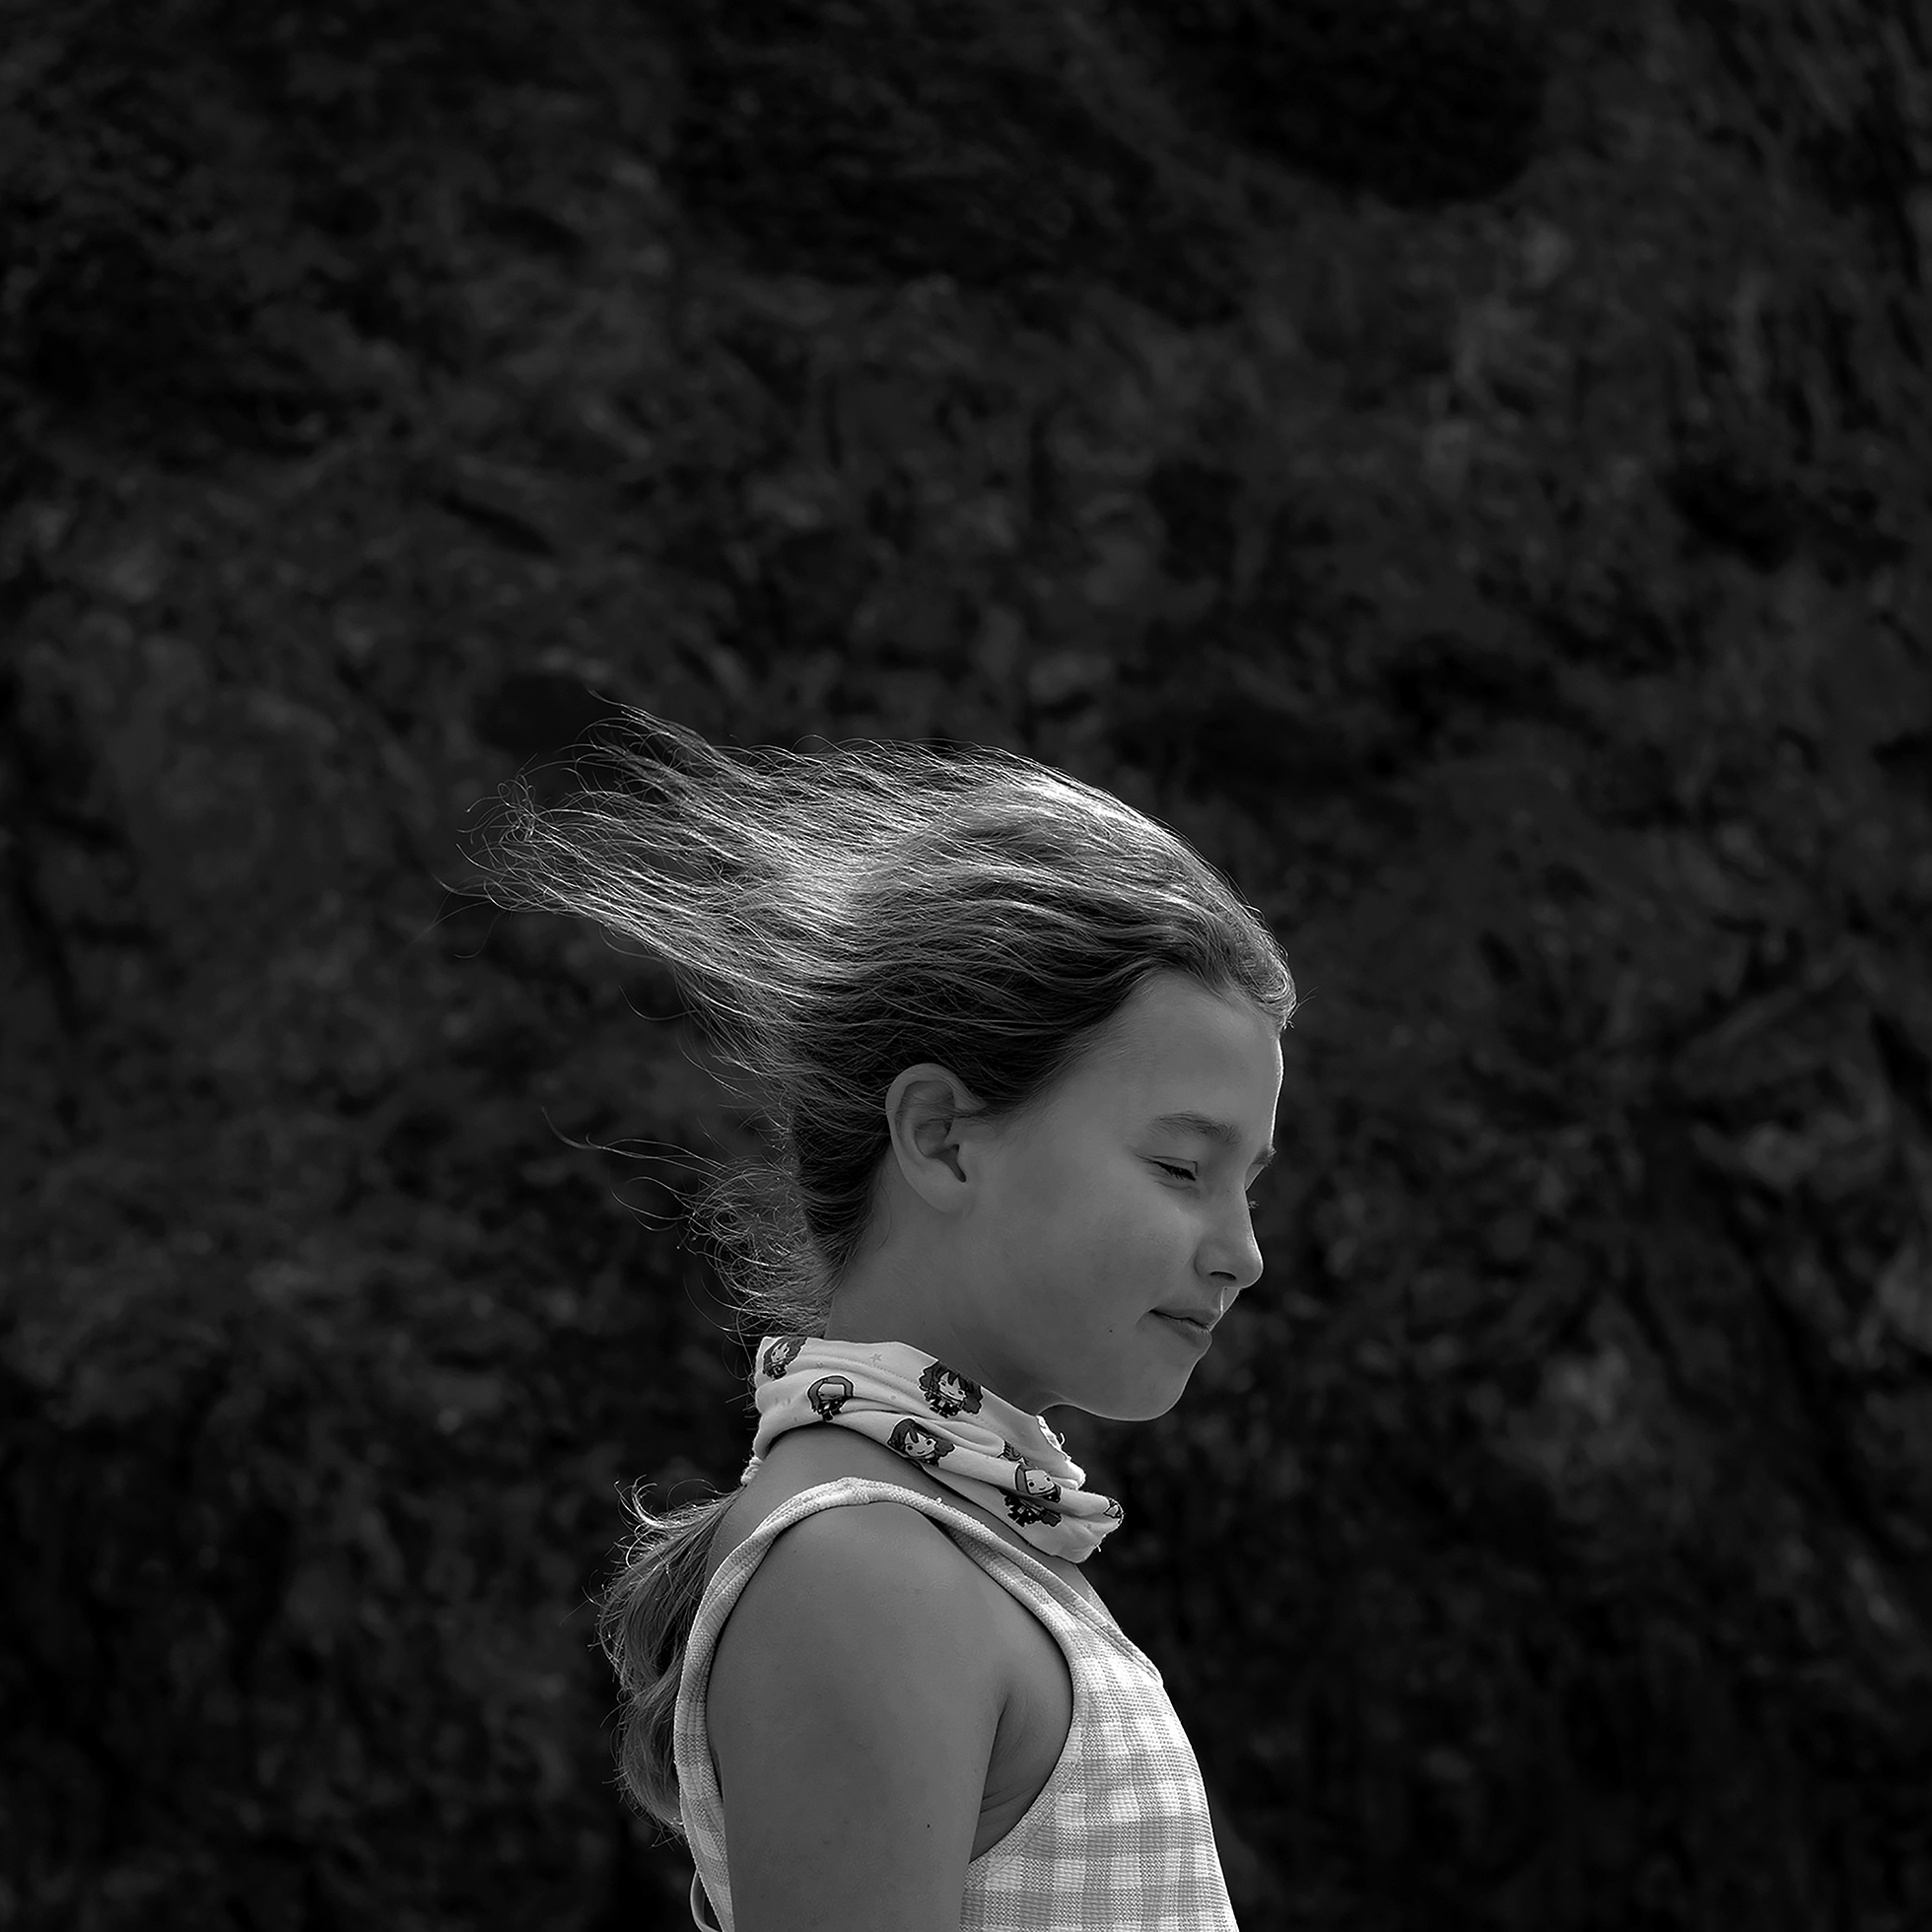 A young girl closes her eyes and mouth and smiles slightly as loose strands of her hair stream straight back in the wind. She stands in profile in front of a dark, rocky background on a windy day at Oregon’s Hug Point in 2020.